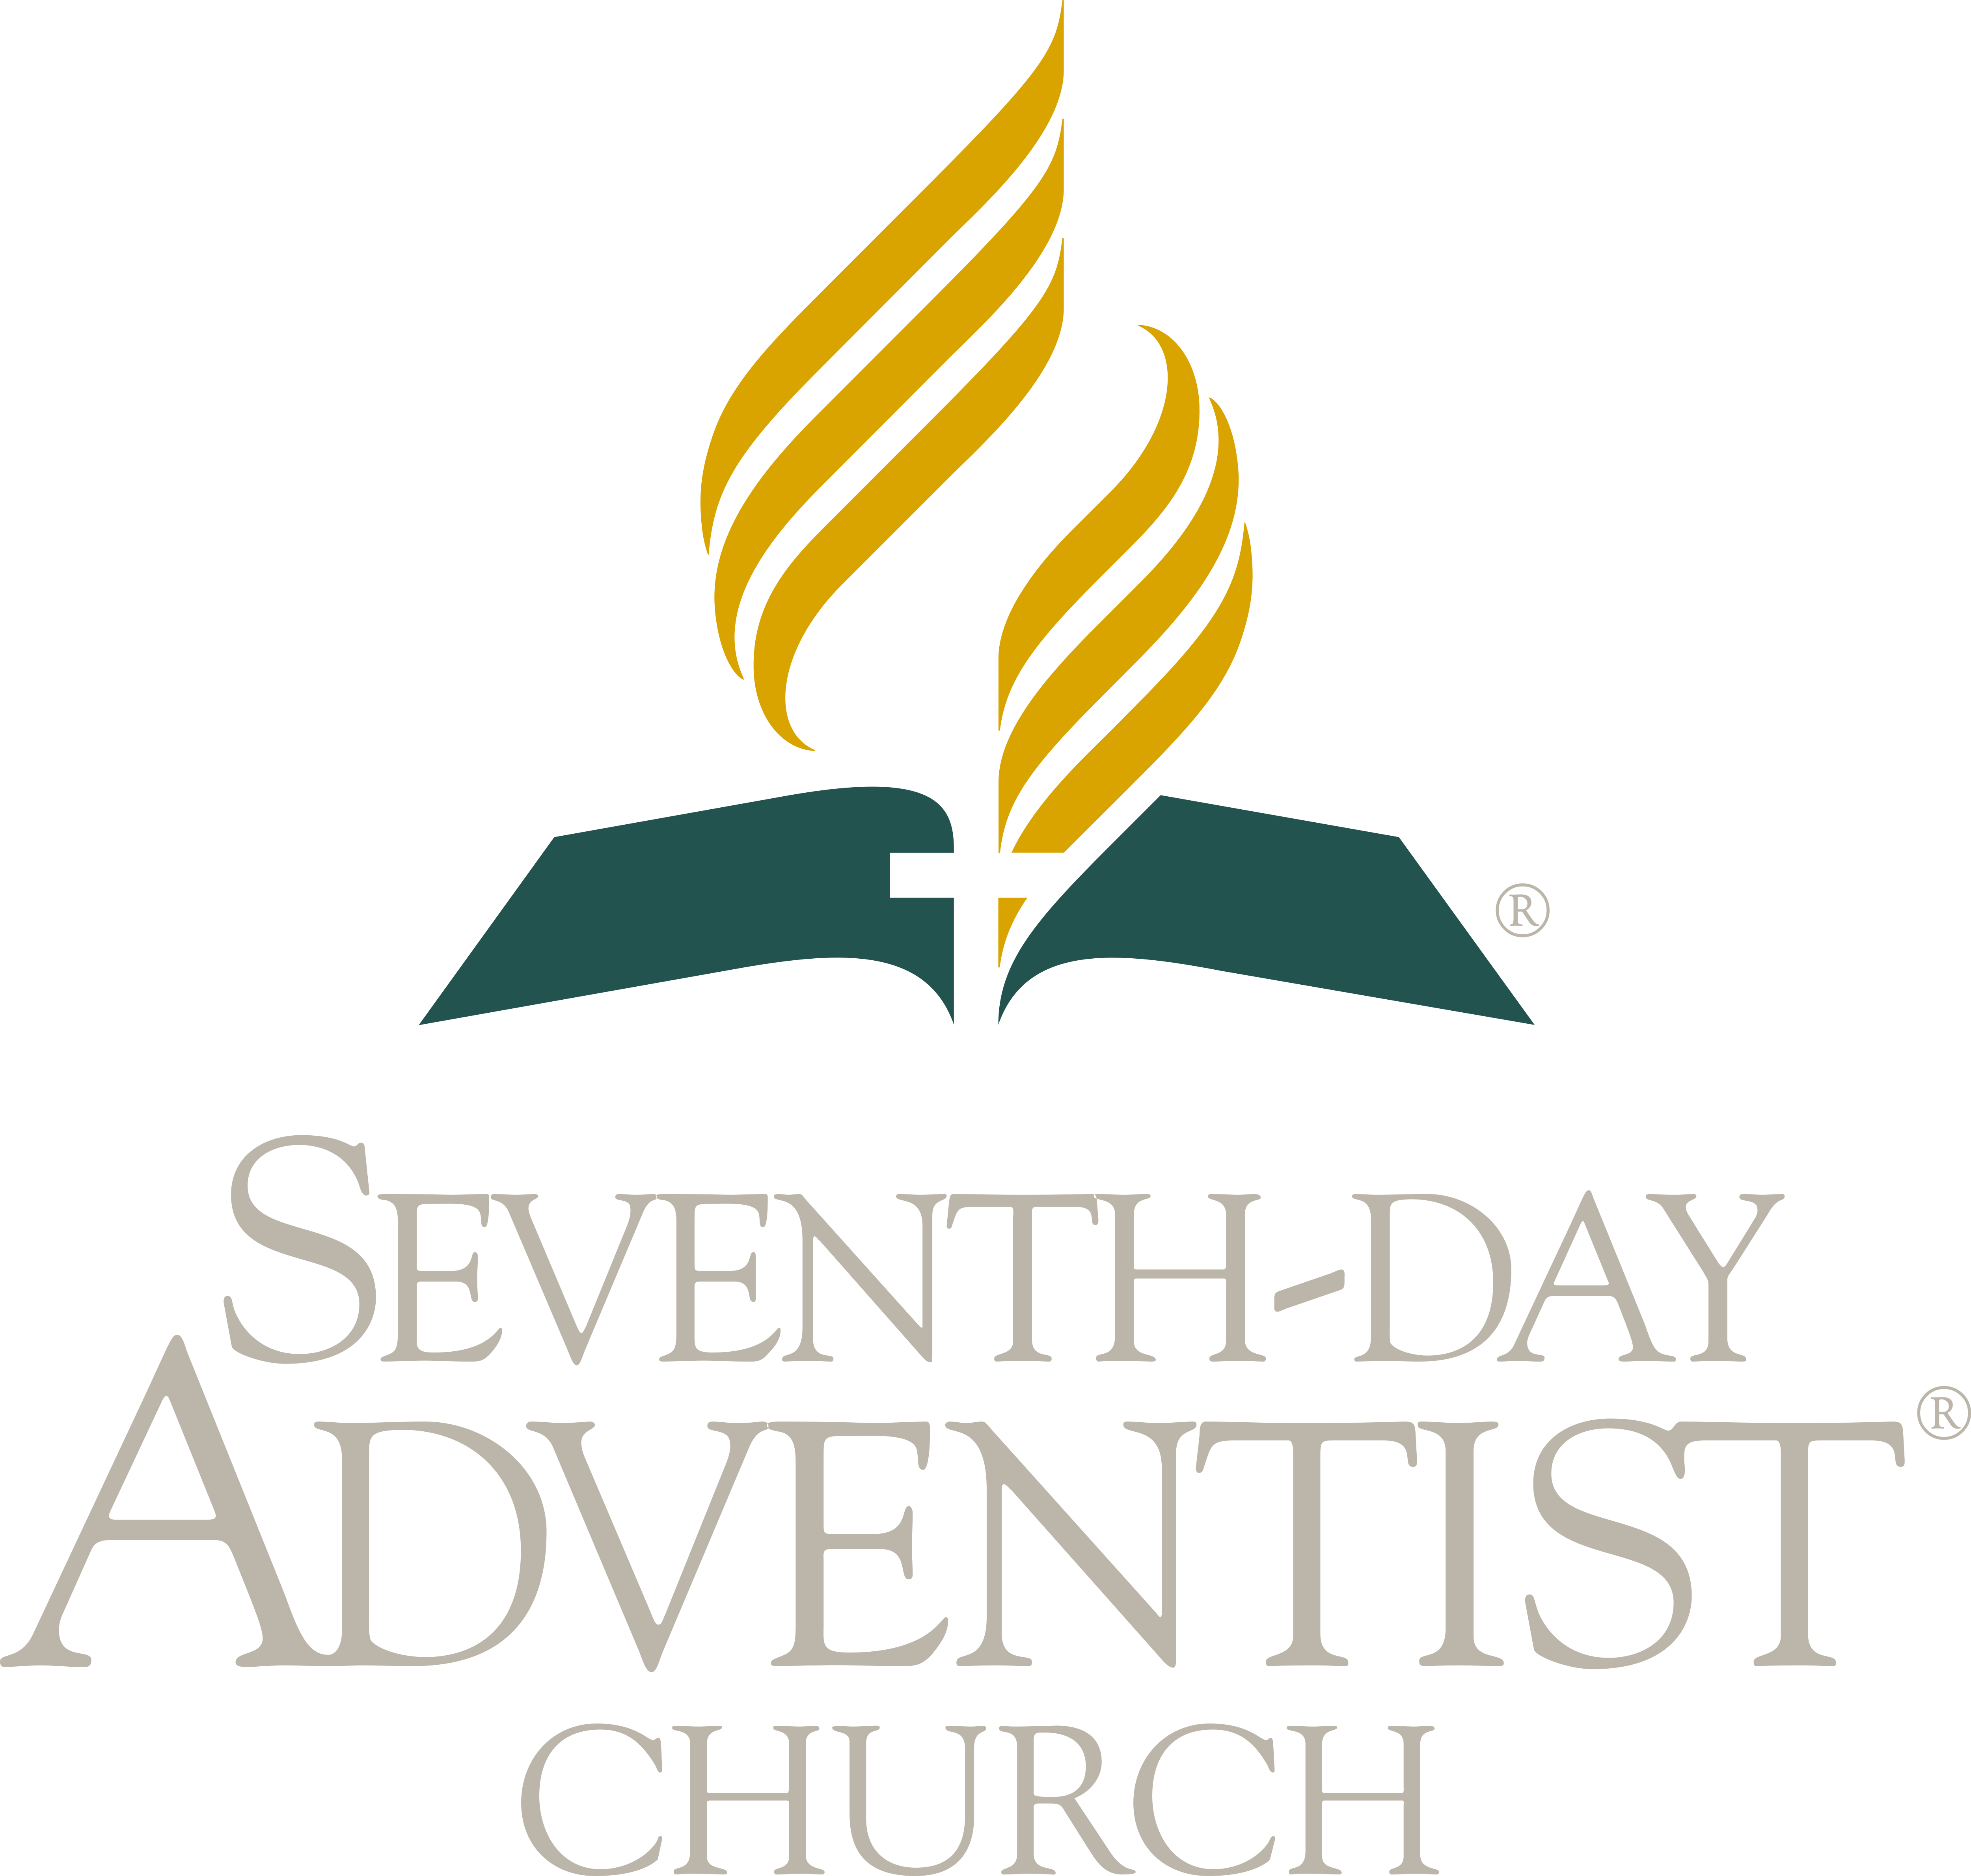 Download Seventh Day Adventist Logo Png Free Png Images Toppng Porn